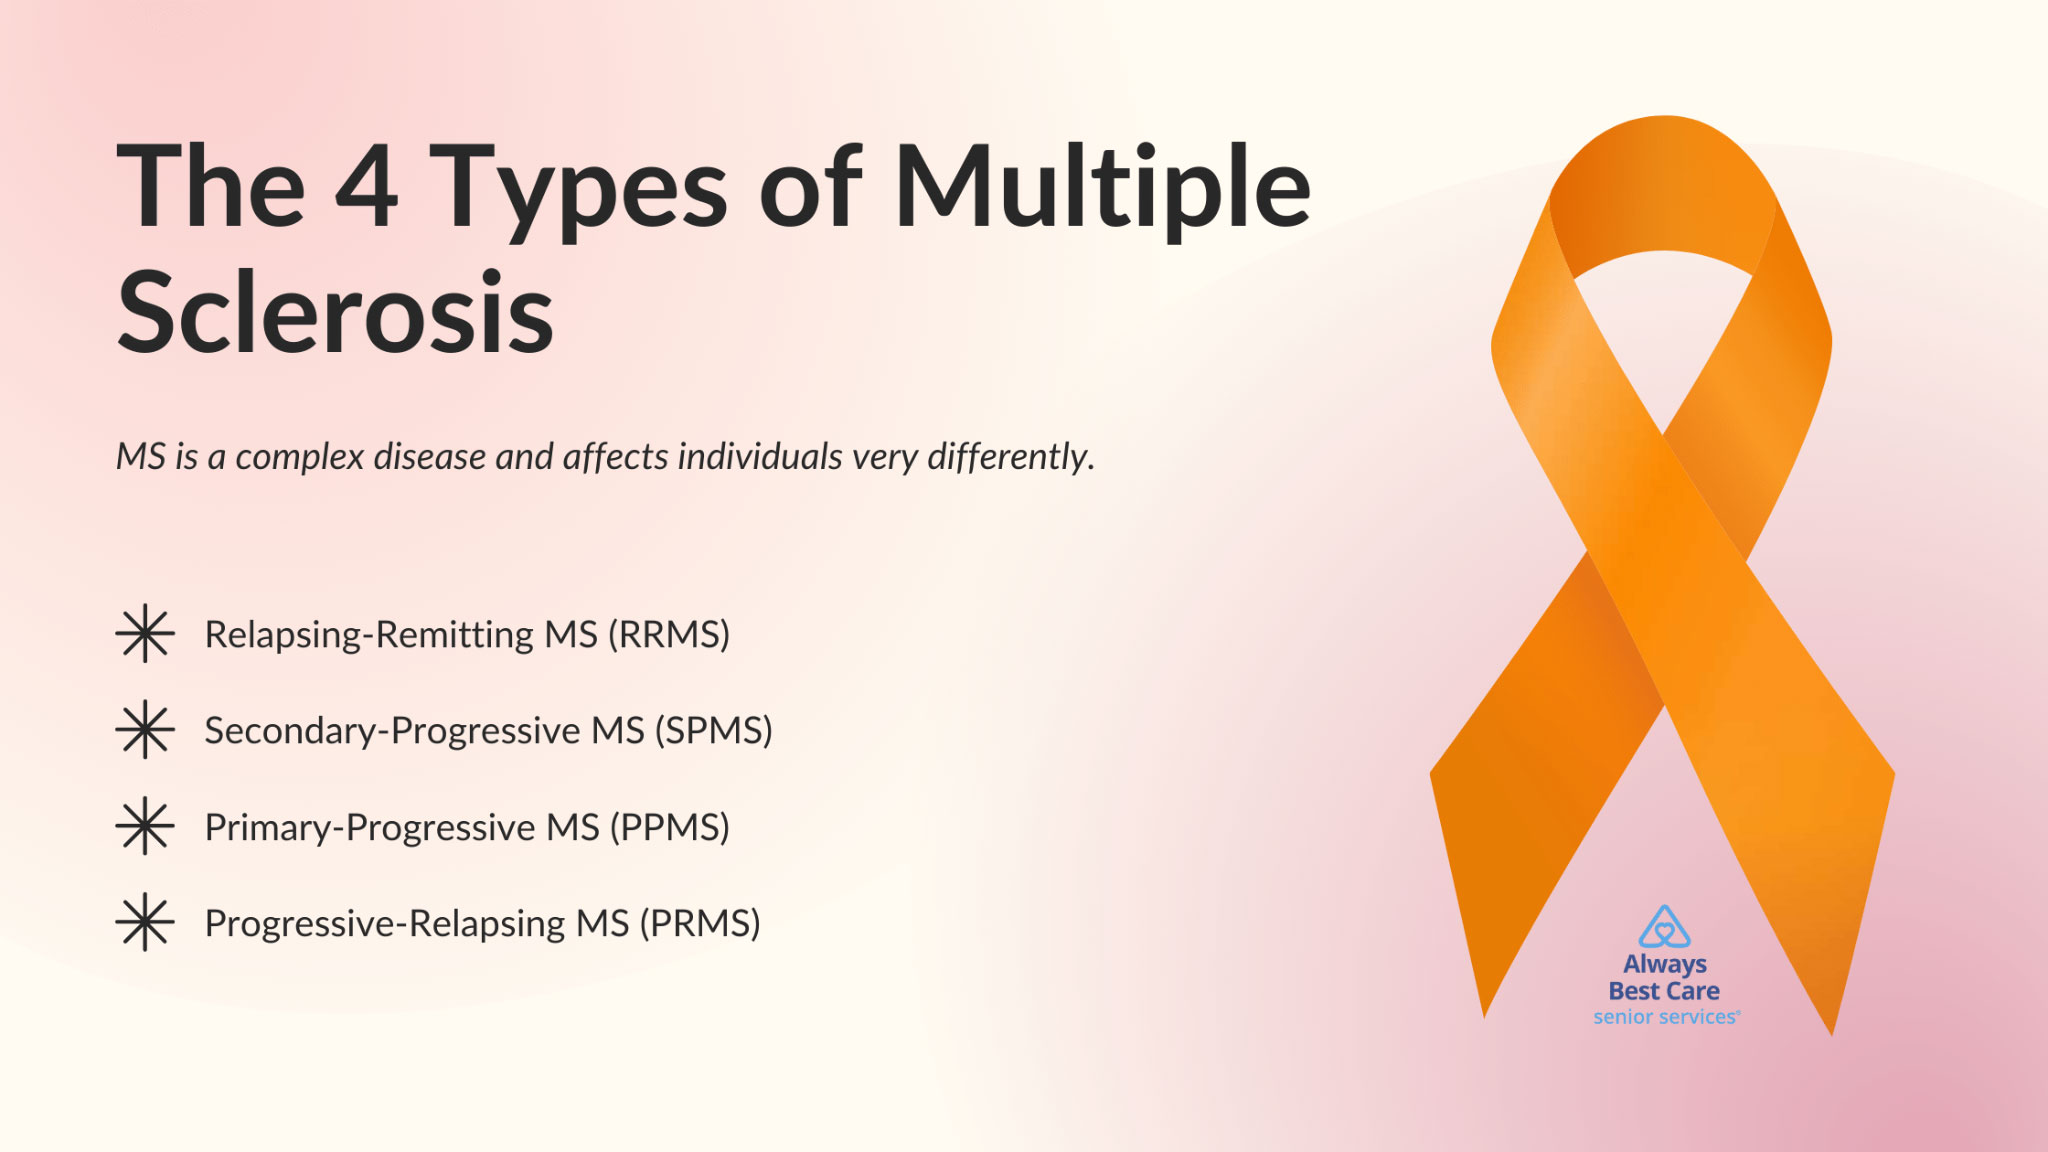 The 4 Types of Multiple Sclerosis